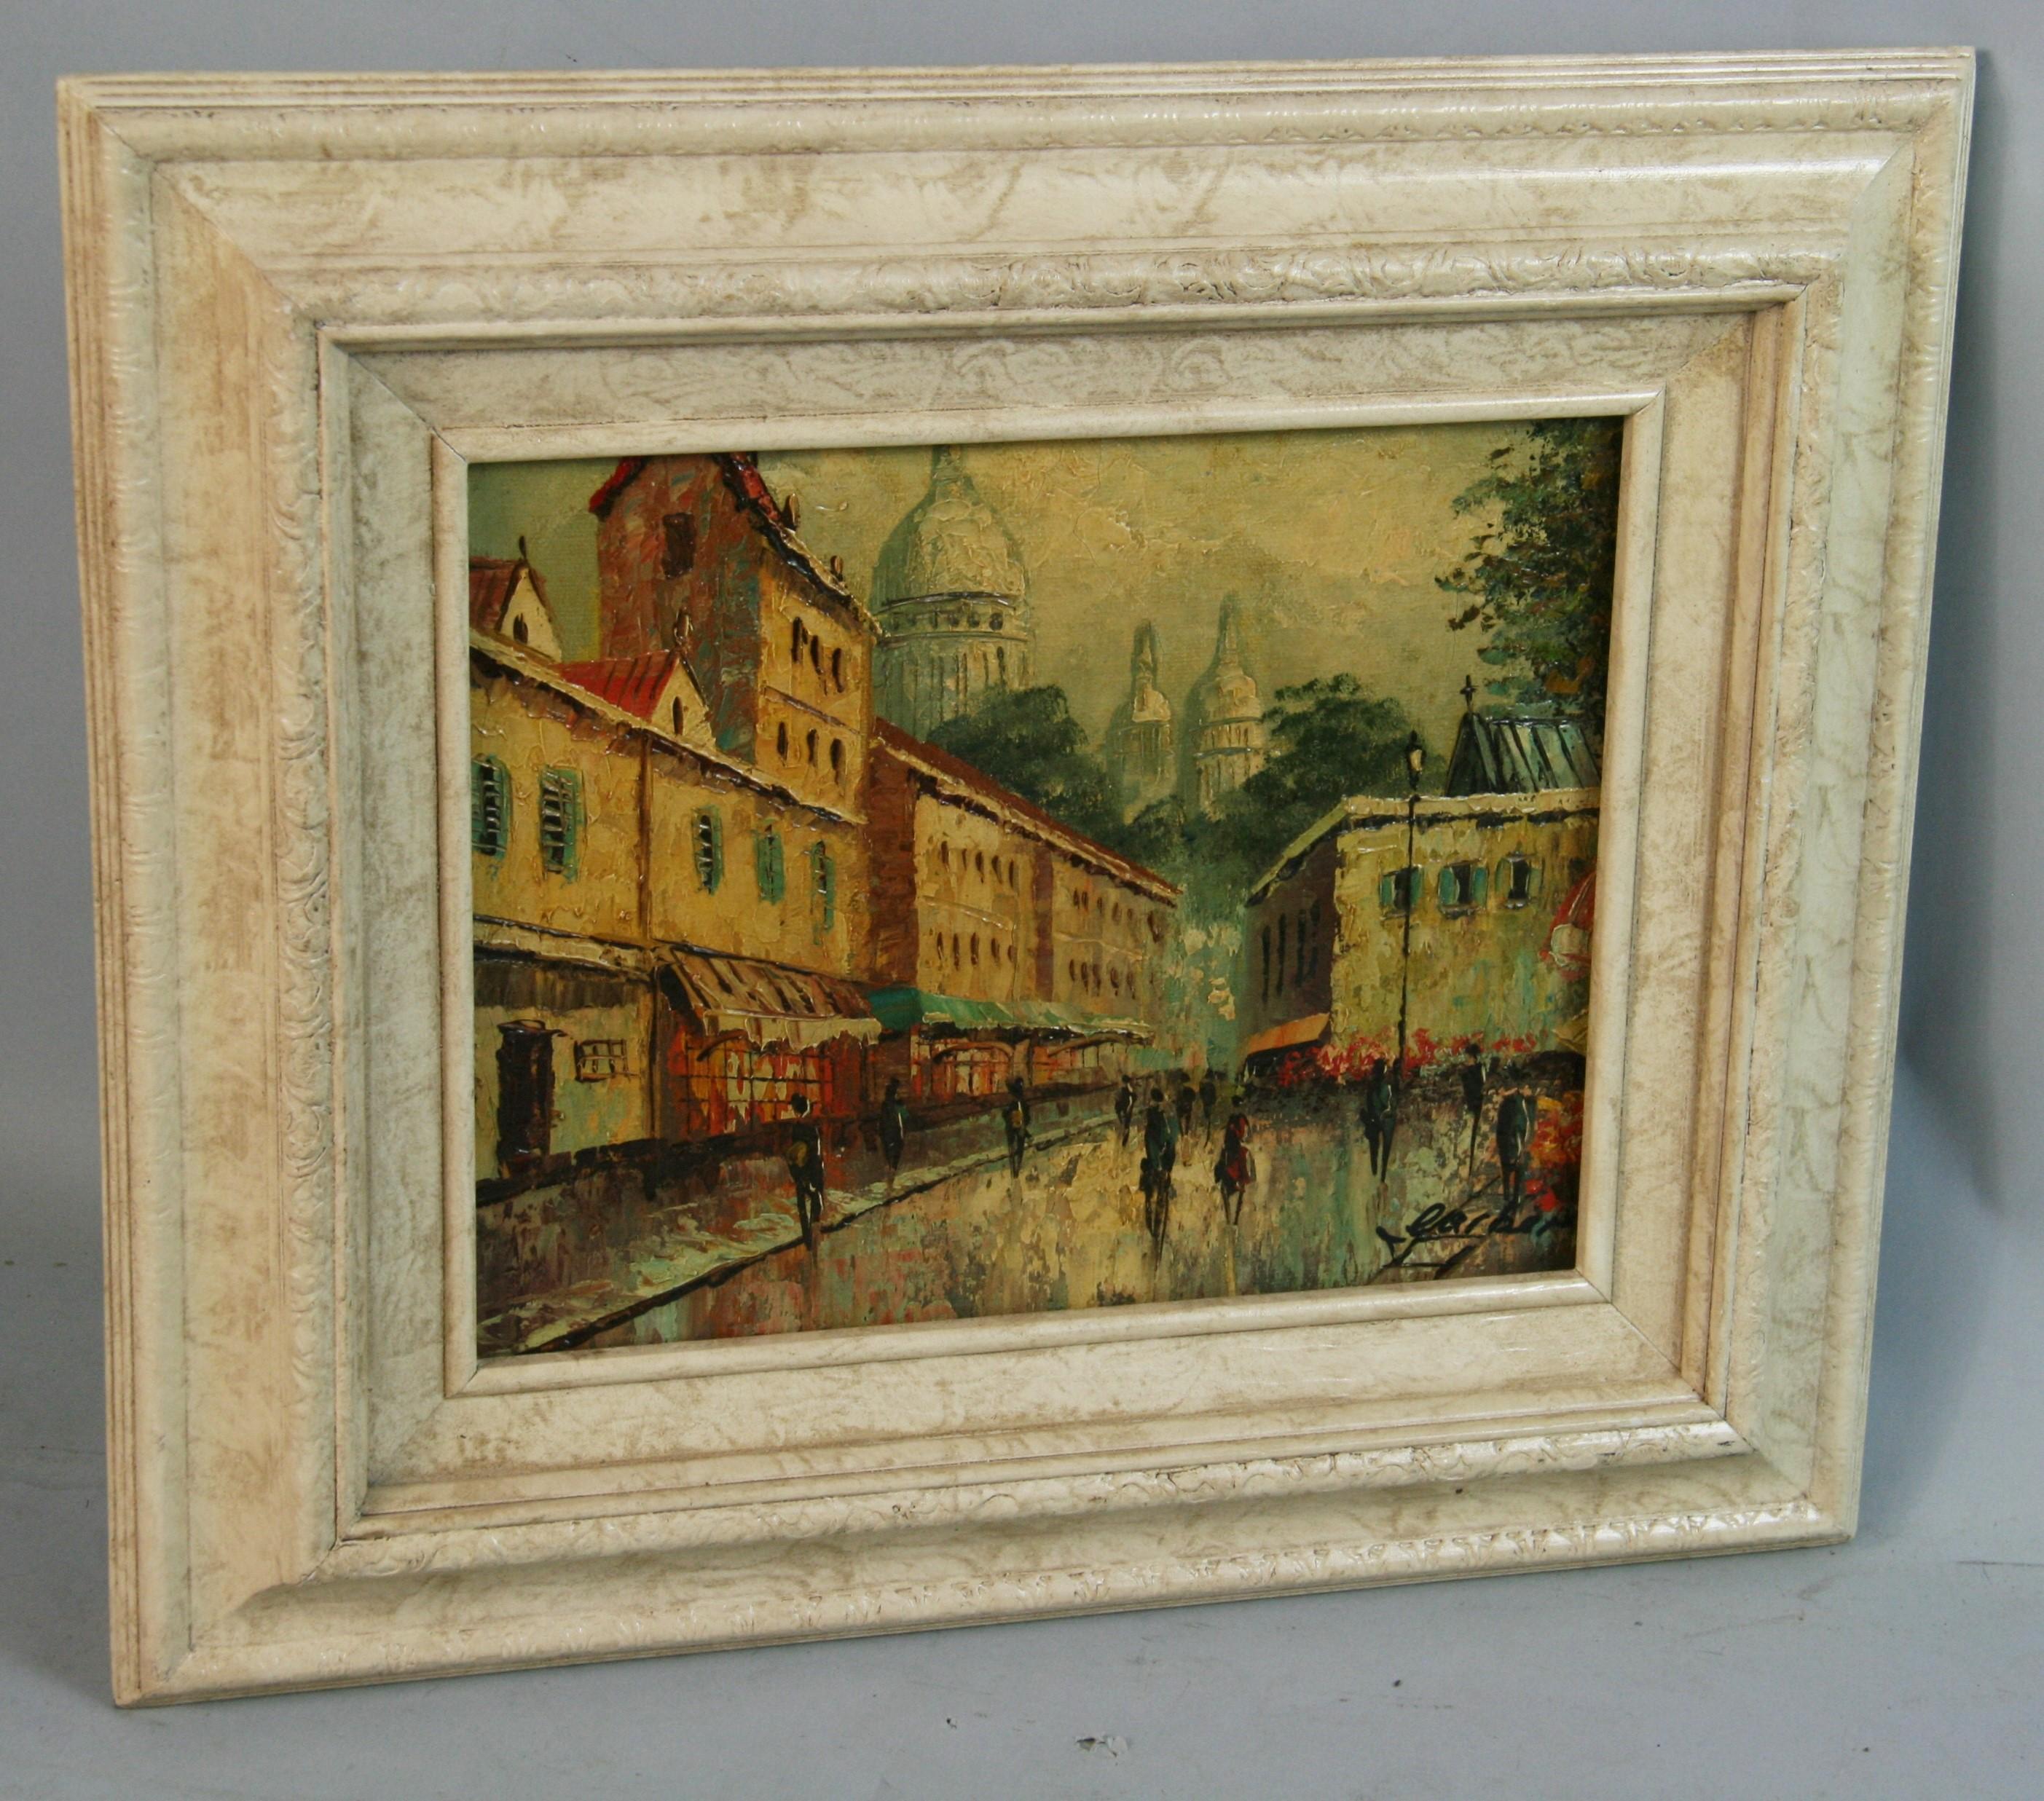 5-3253a Oil on canvas od the streets of Paris set in a vintage wood frame
Image size 9.5x8